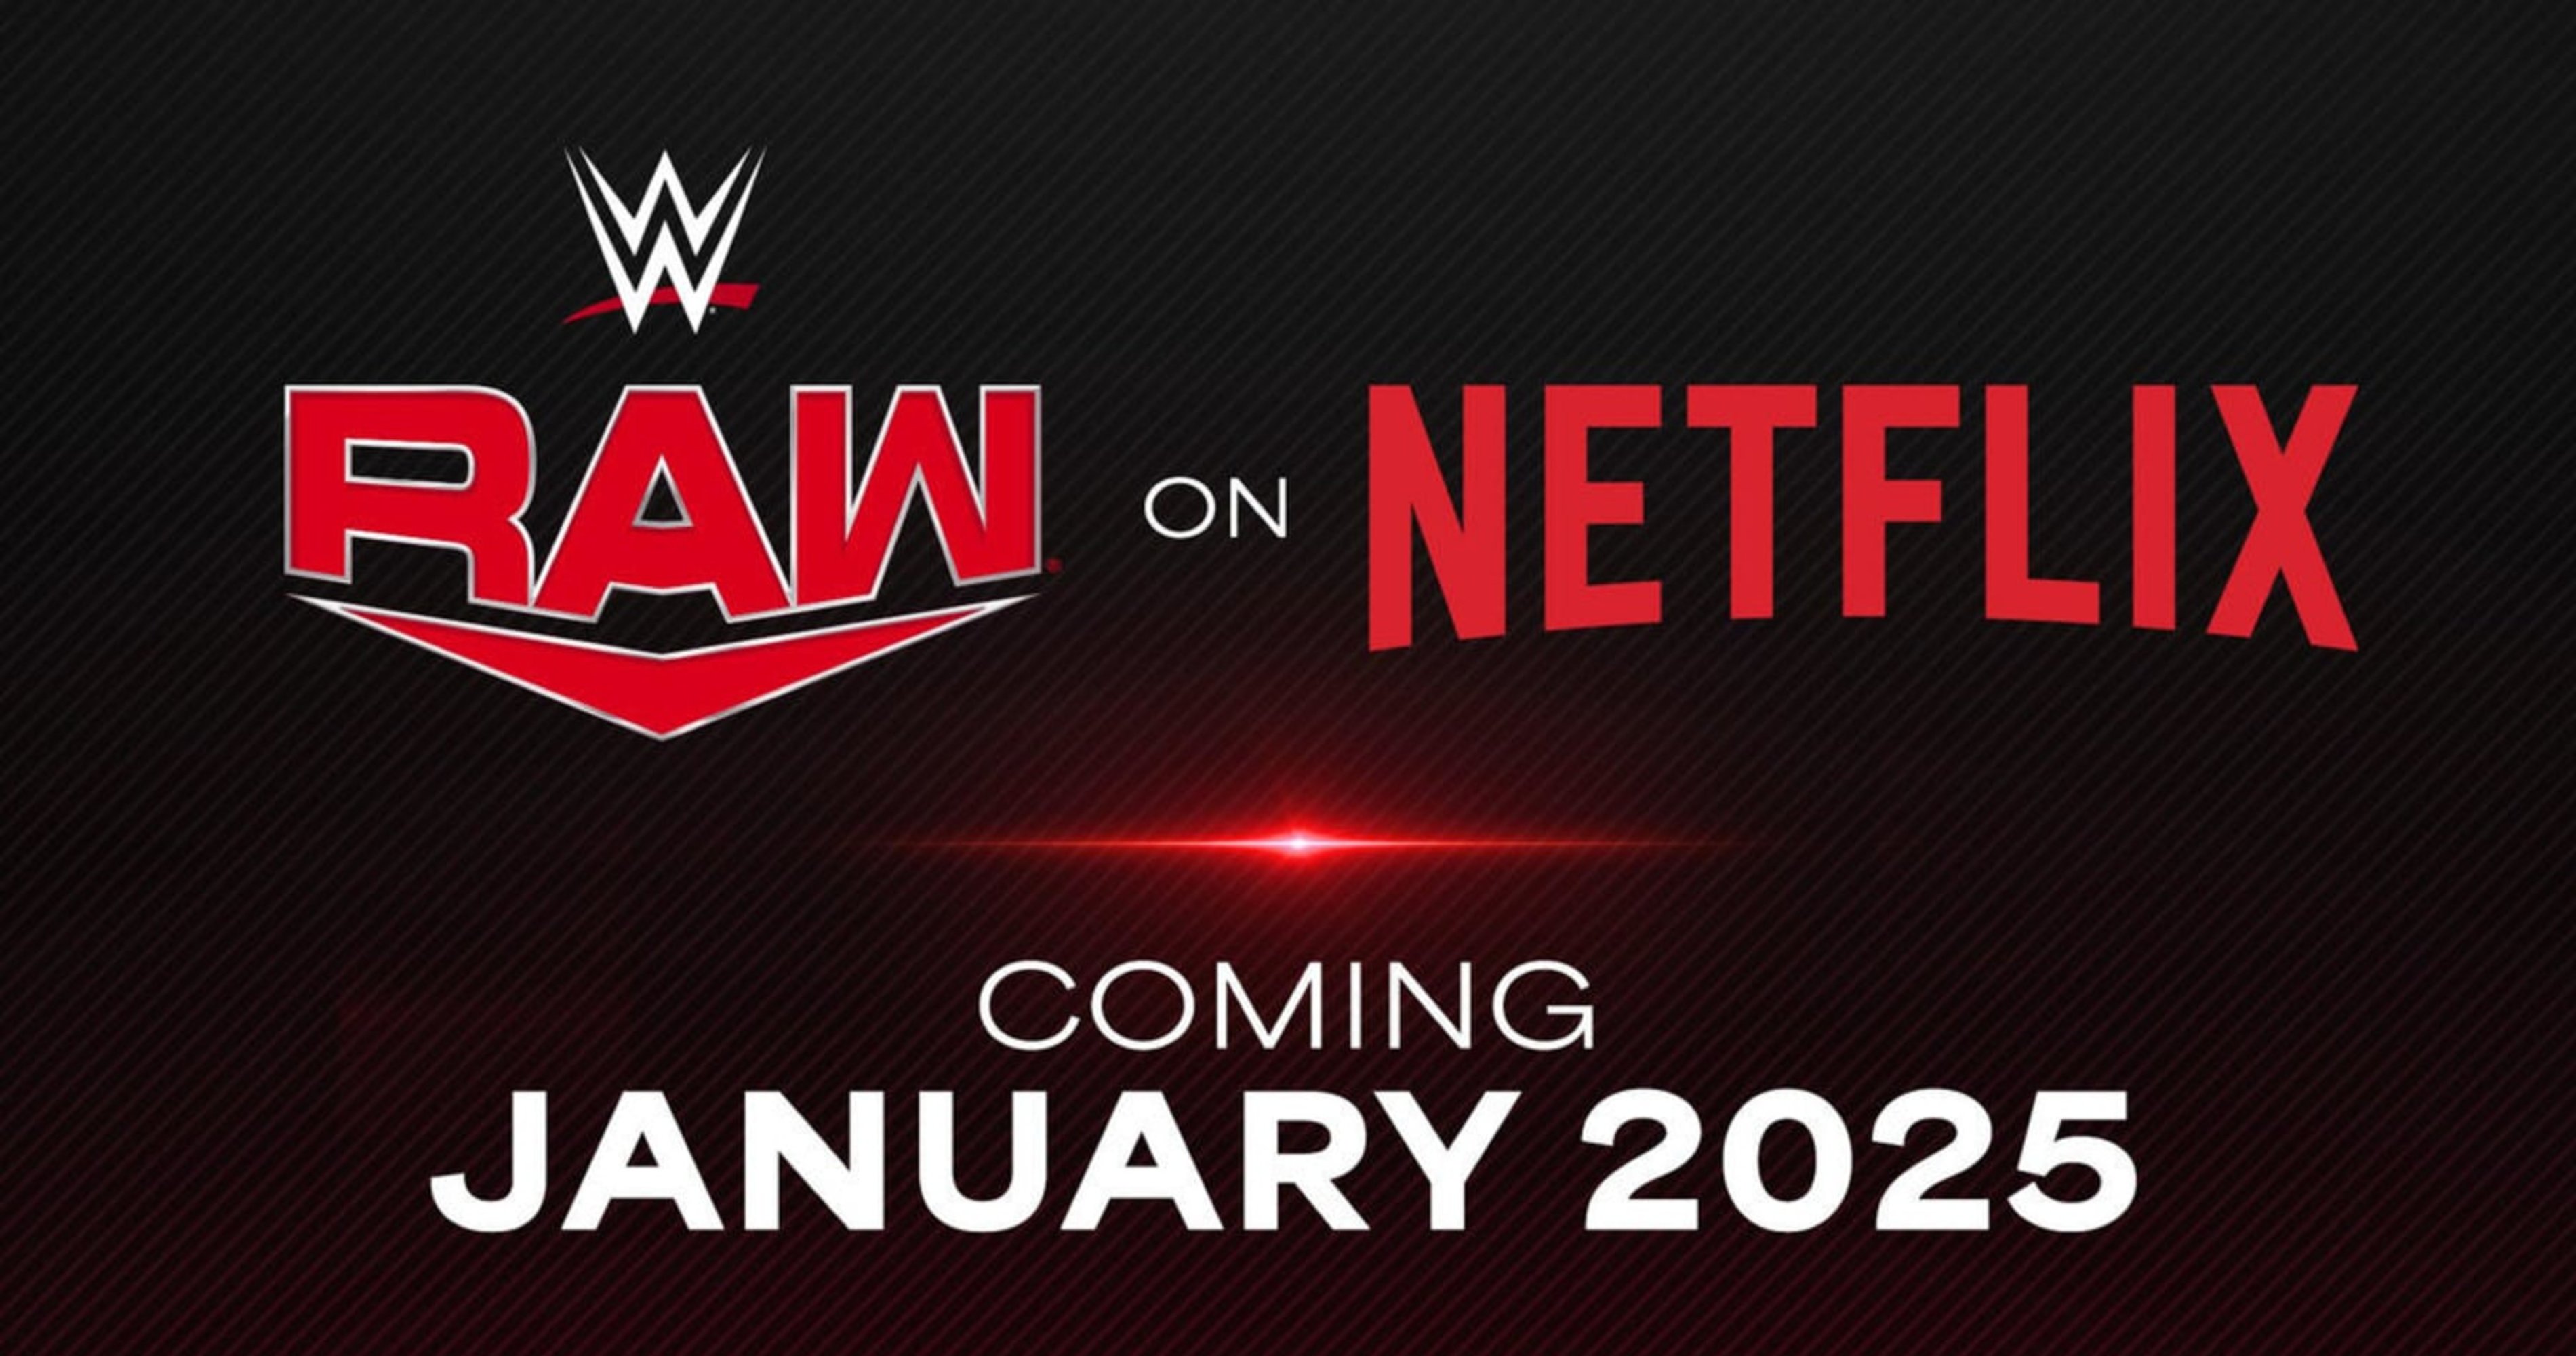 The 5 Biggest Changes We Can Expect When WWE Raw Moves to Netflix in 2025